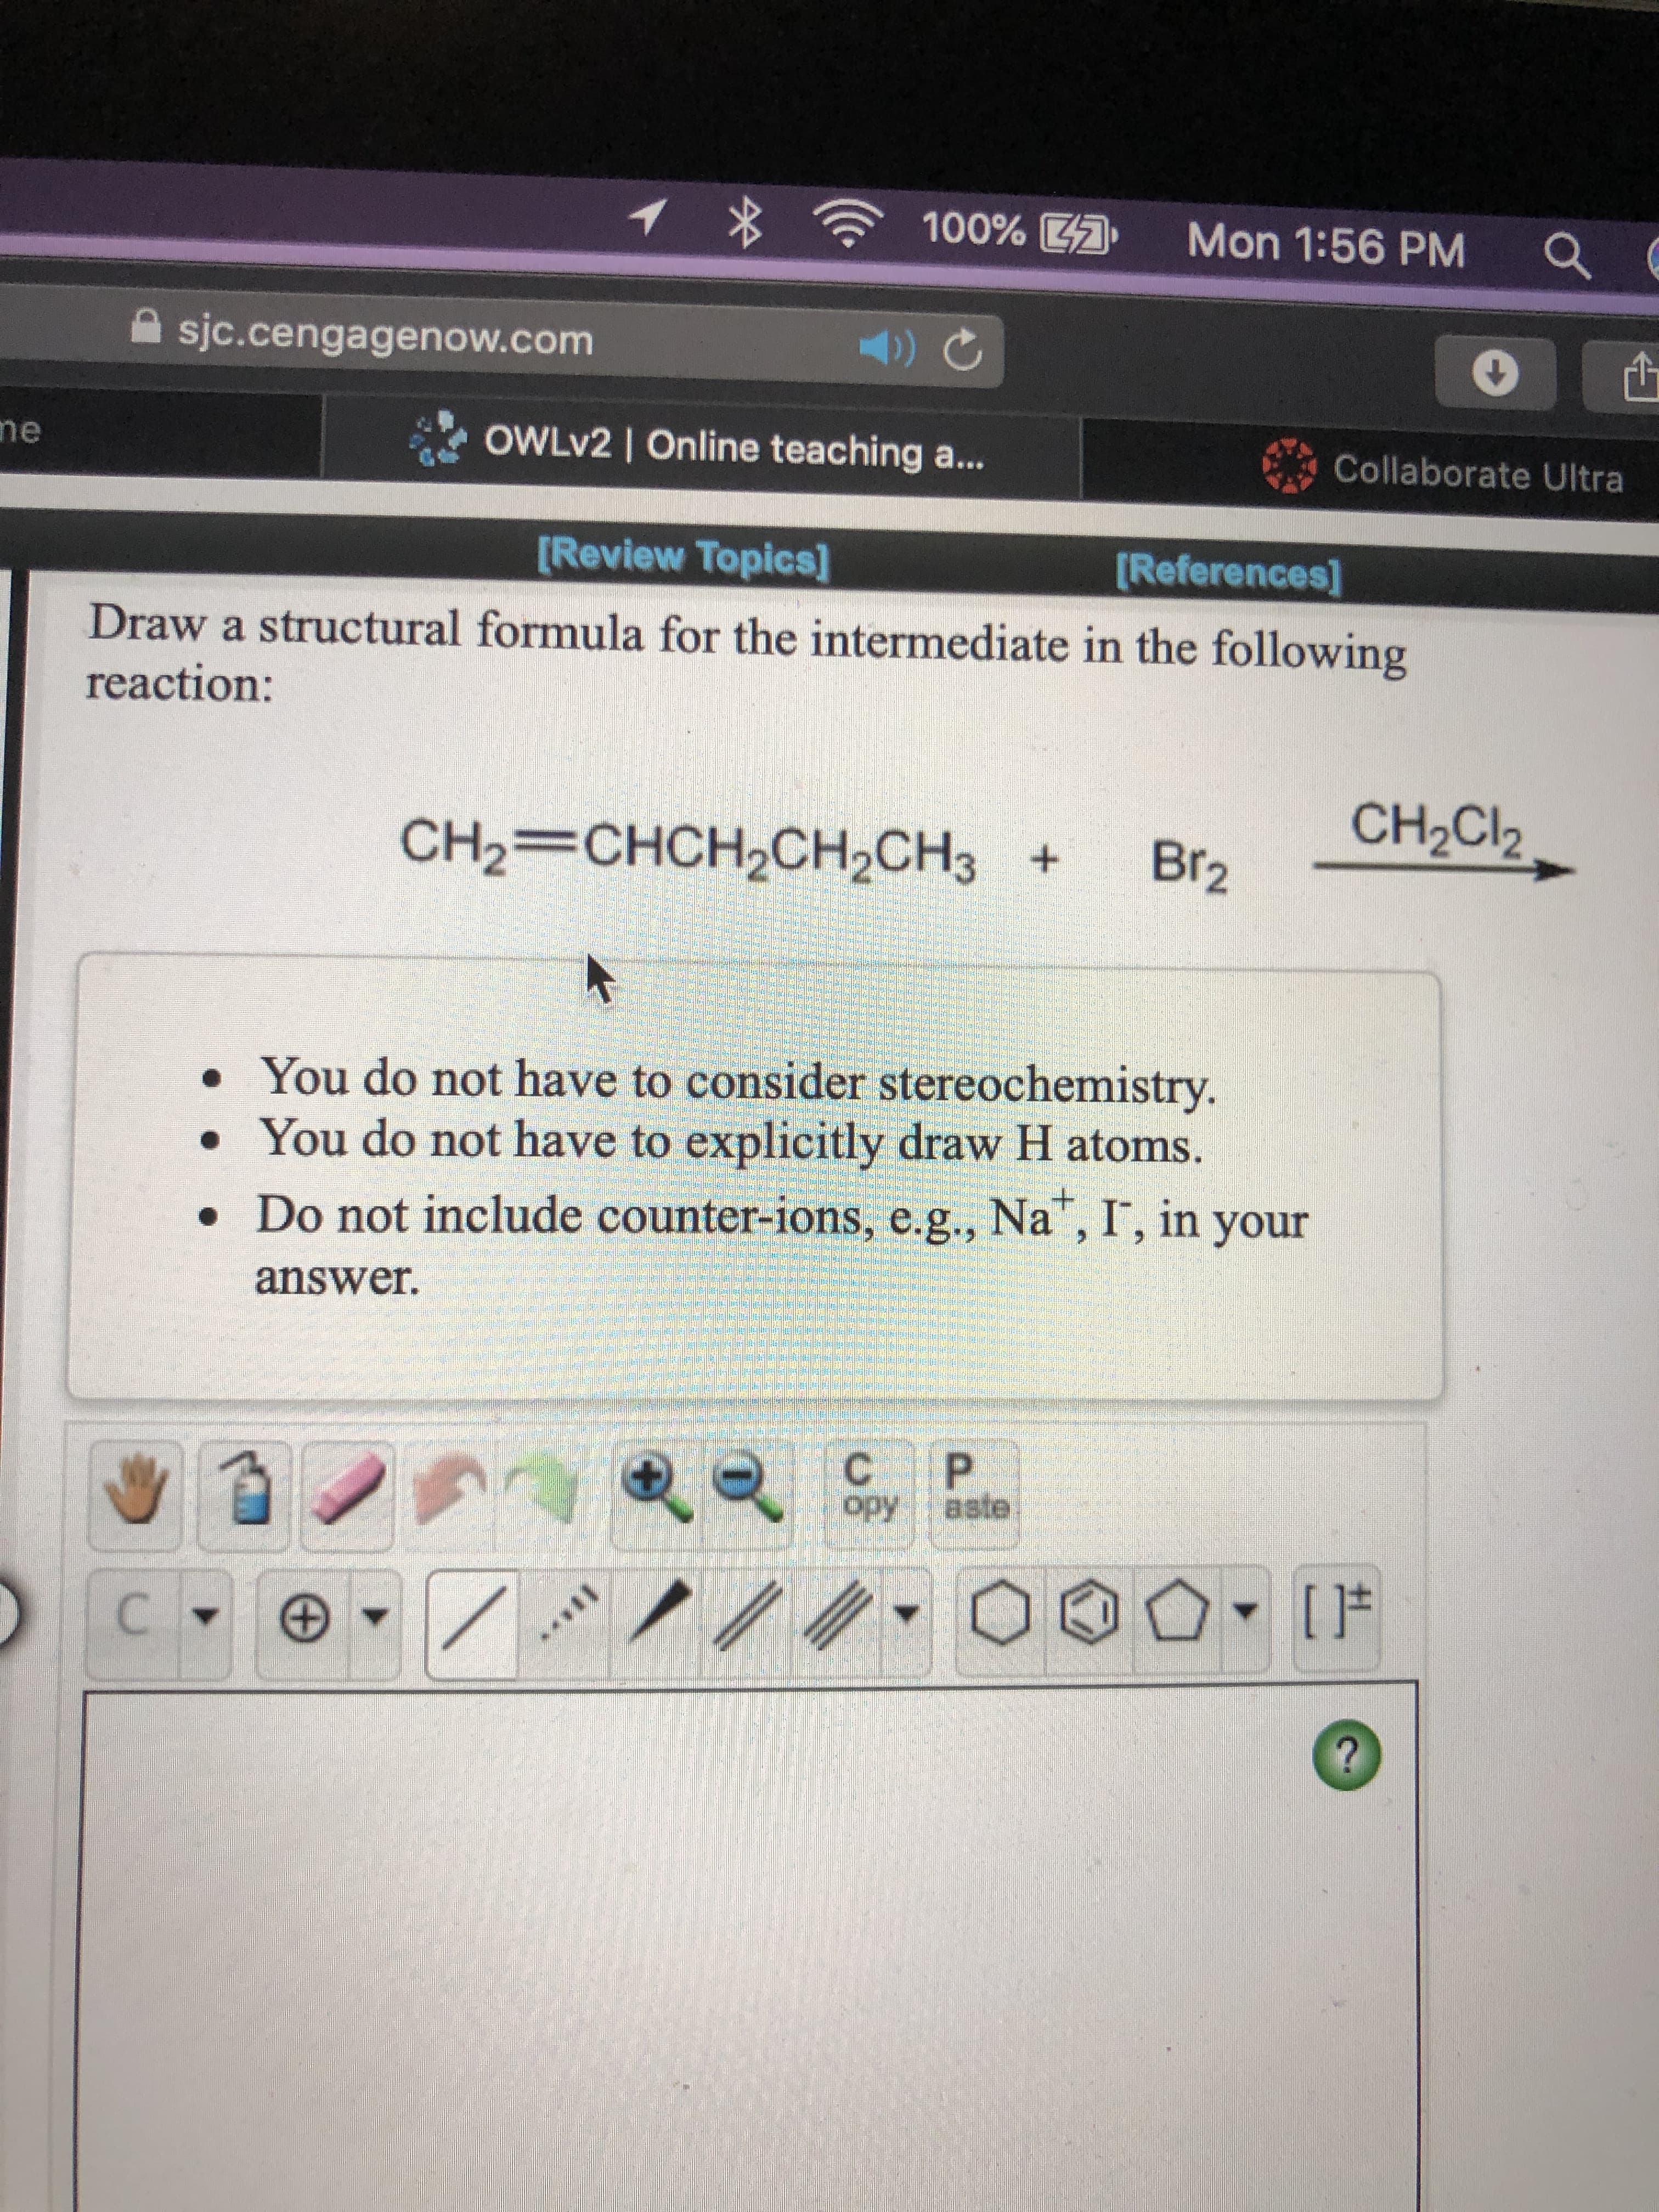 Draw a structural formula for the intermediate in the following
reaction:
CH2Cl2
CH2=CHCH2CH2CH3 +
Br2
